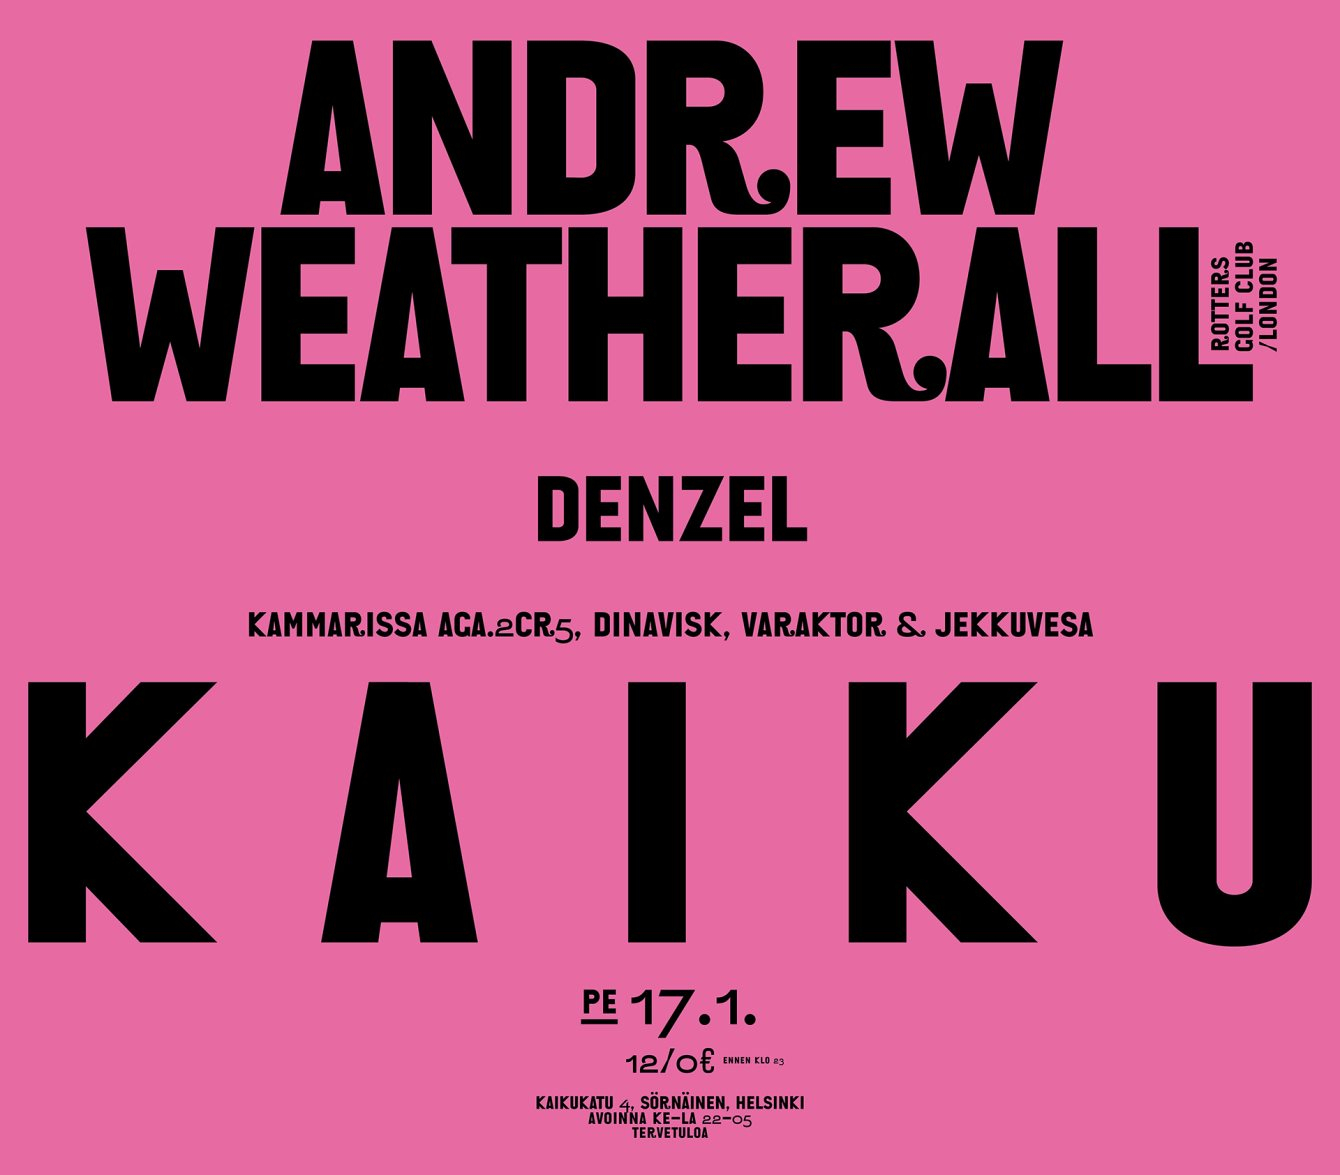 Andrew Weatherall - Flyer front